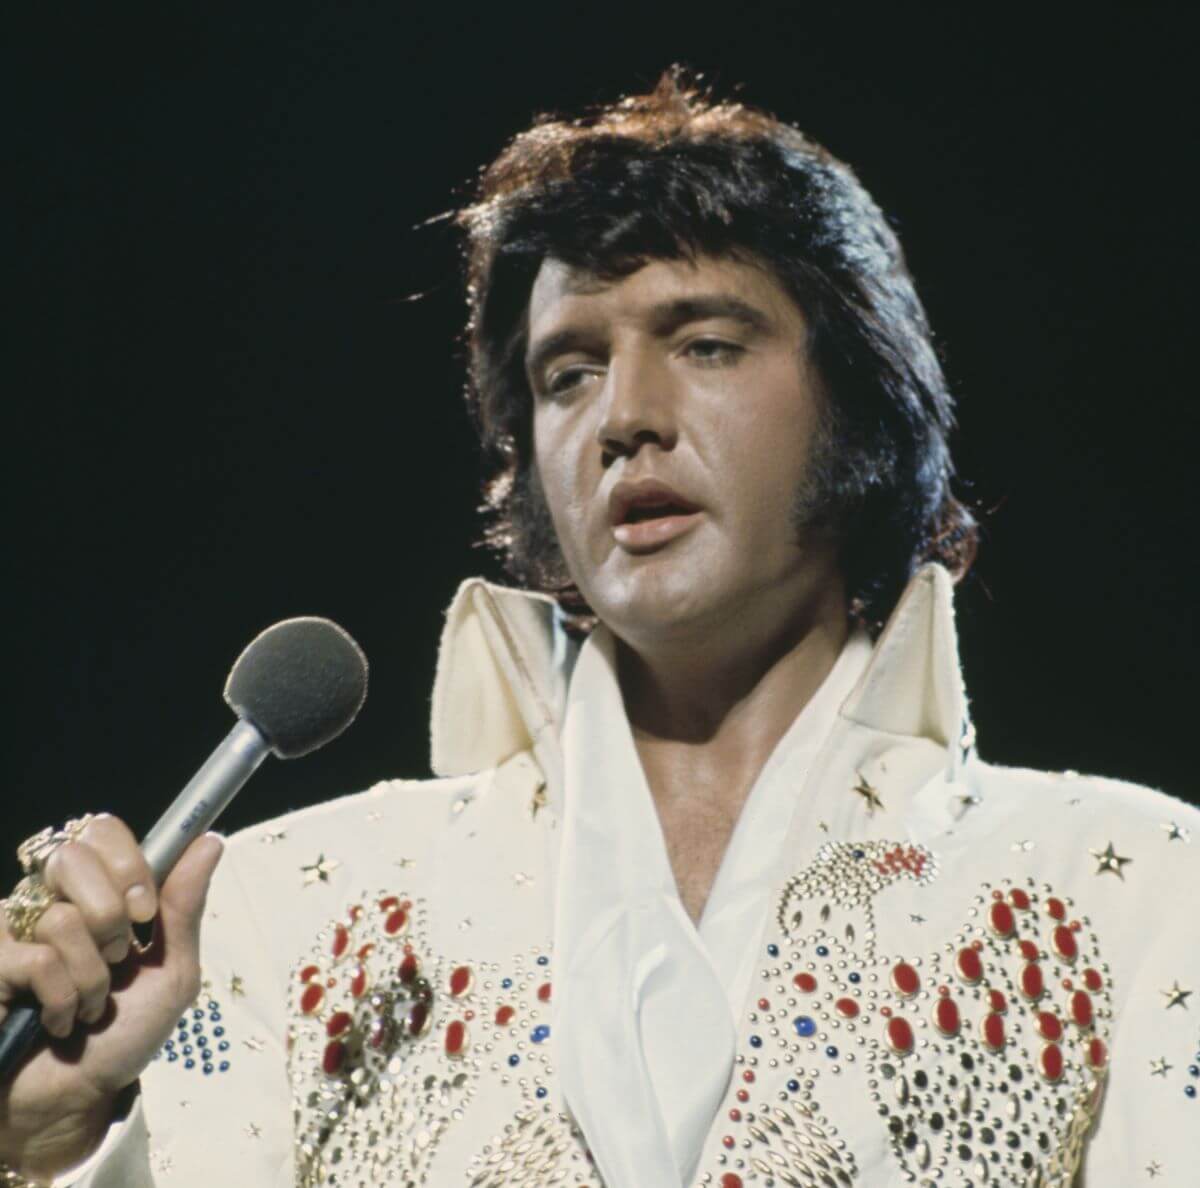 Elvis Presley wears a white jumpsuit and holds a microphone.